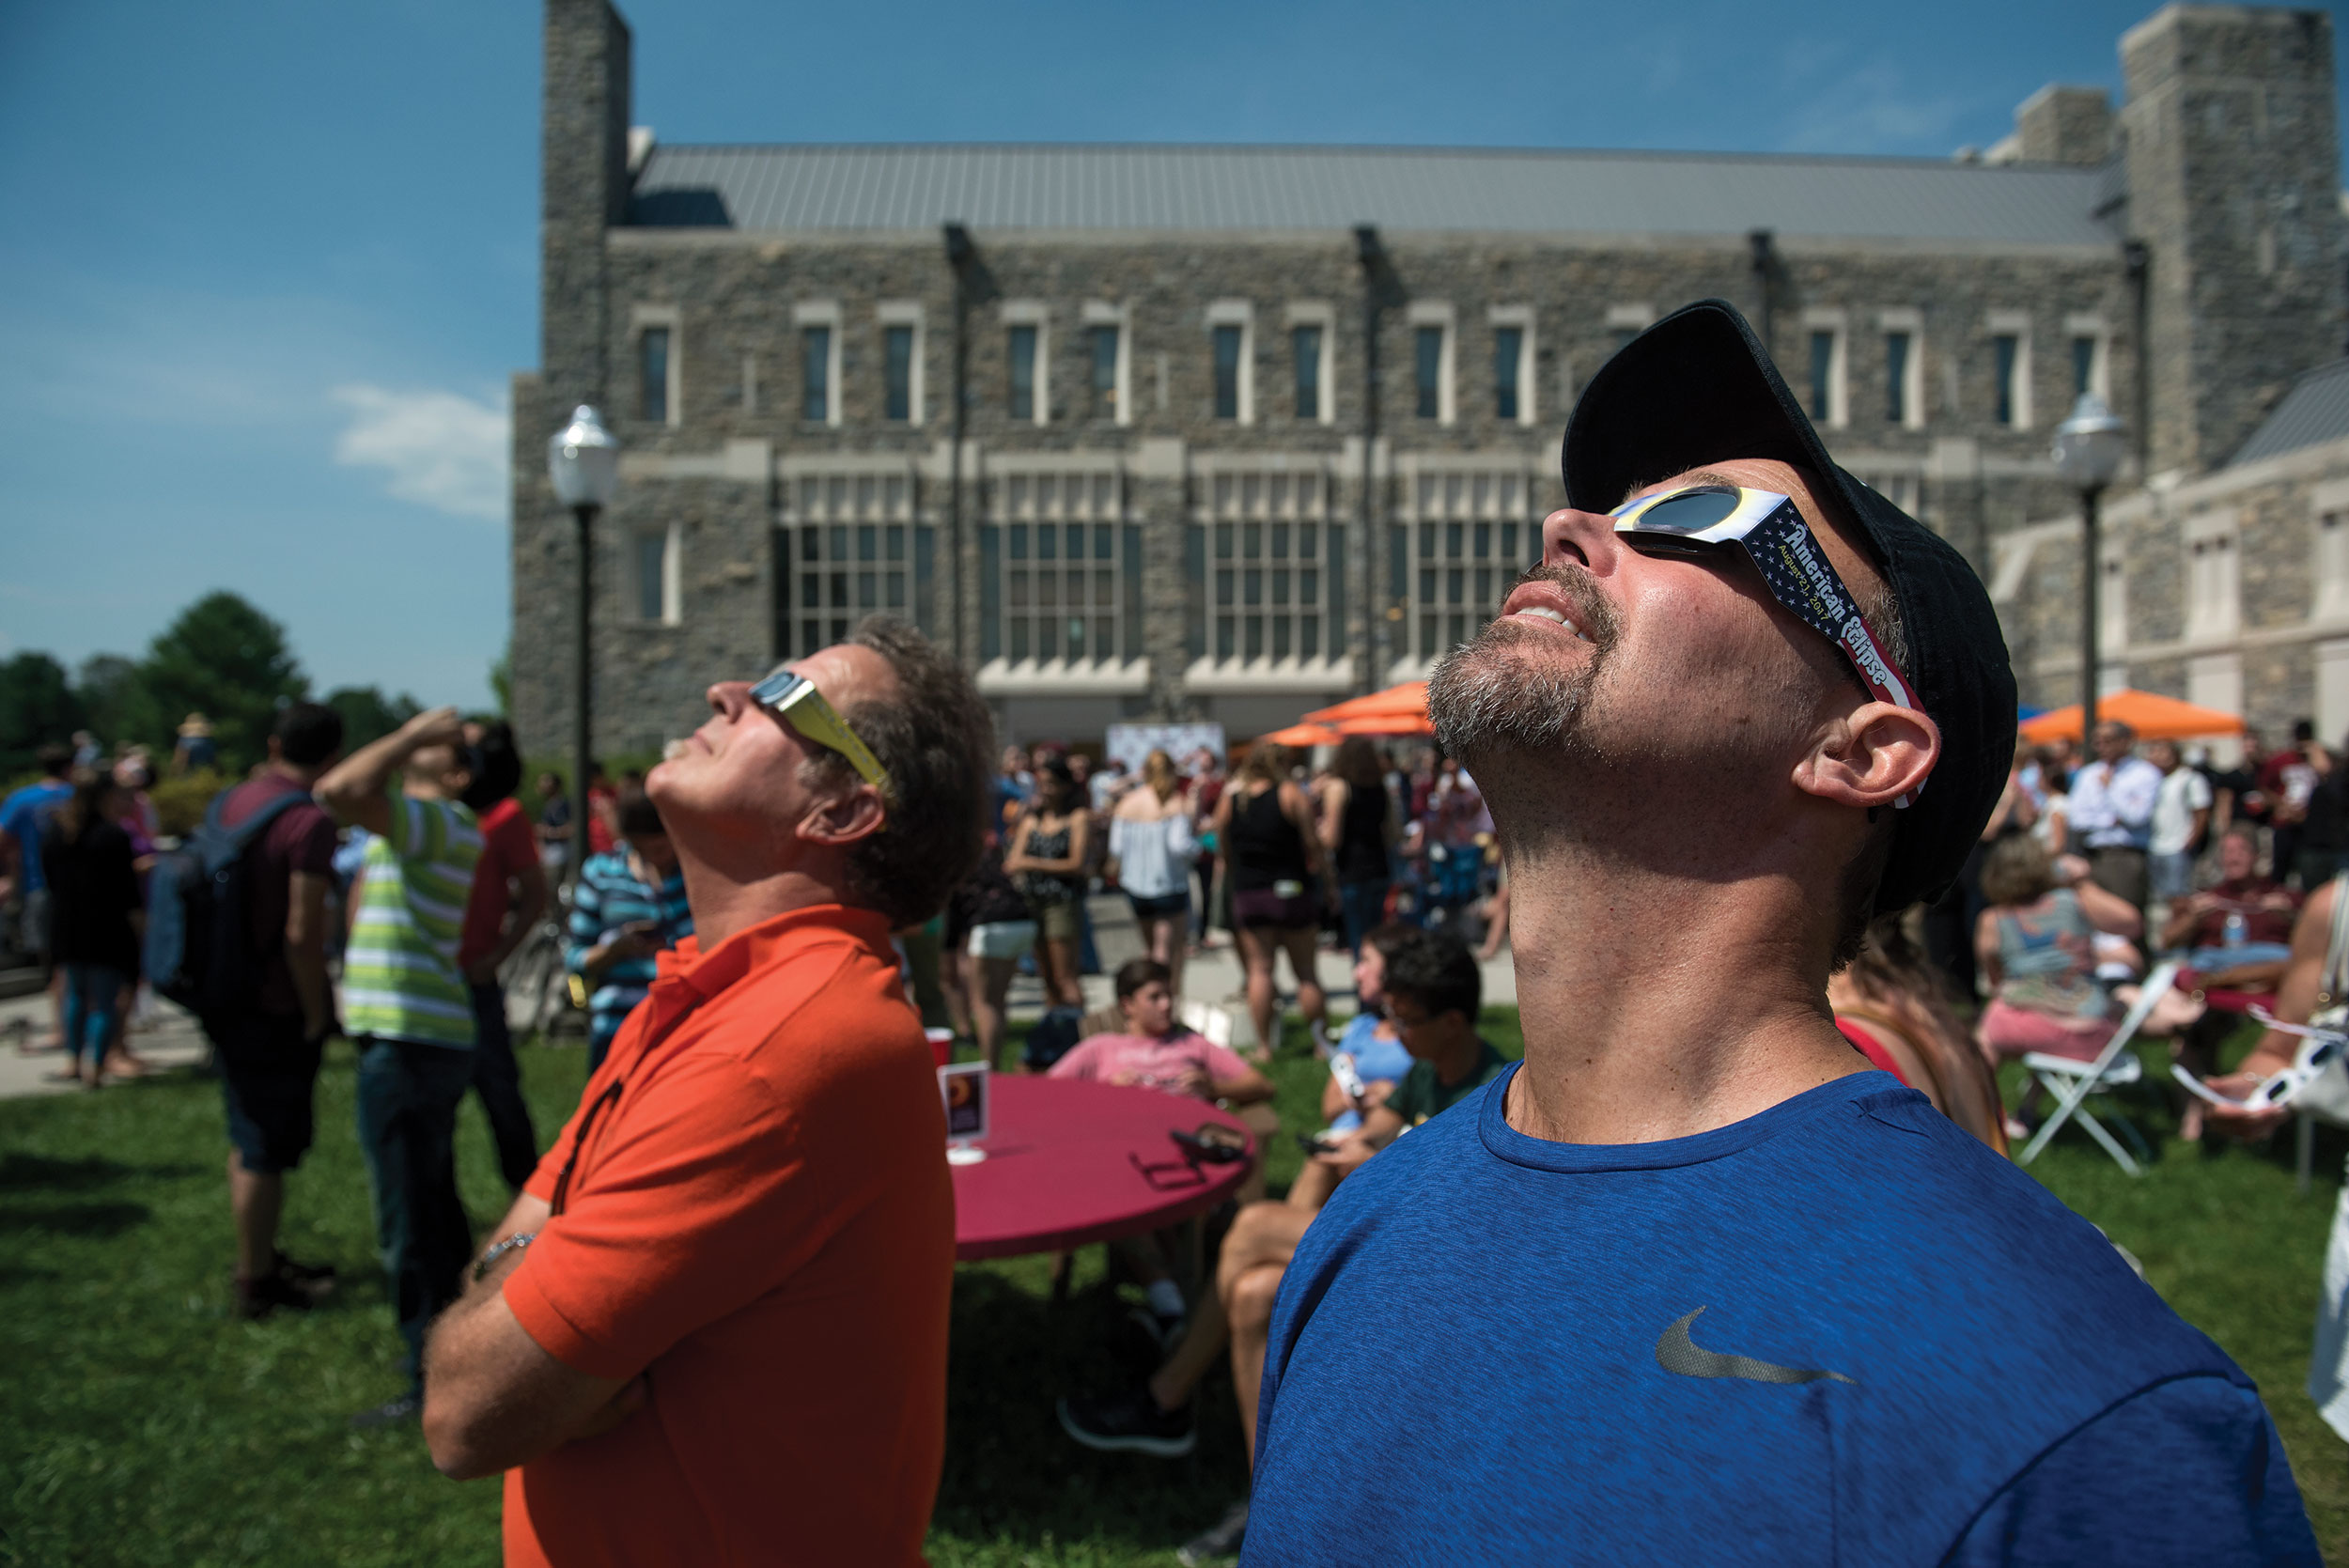 viewing the solar eclipse